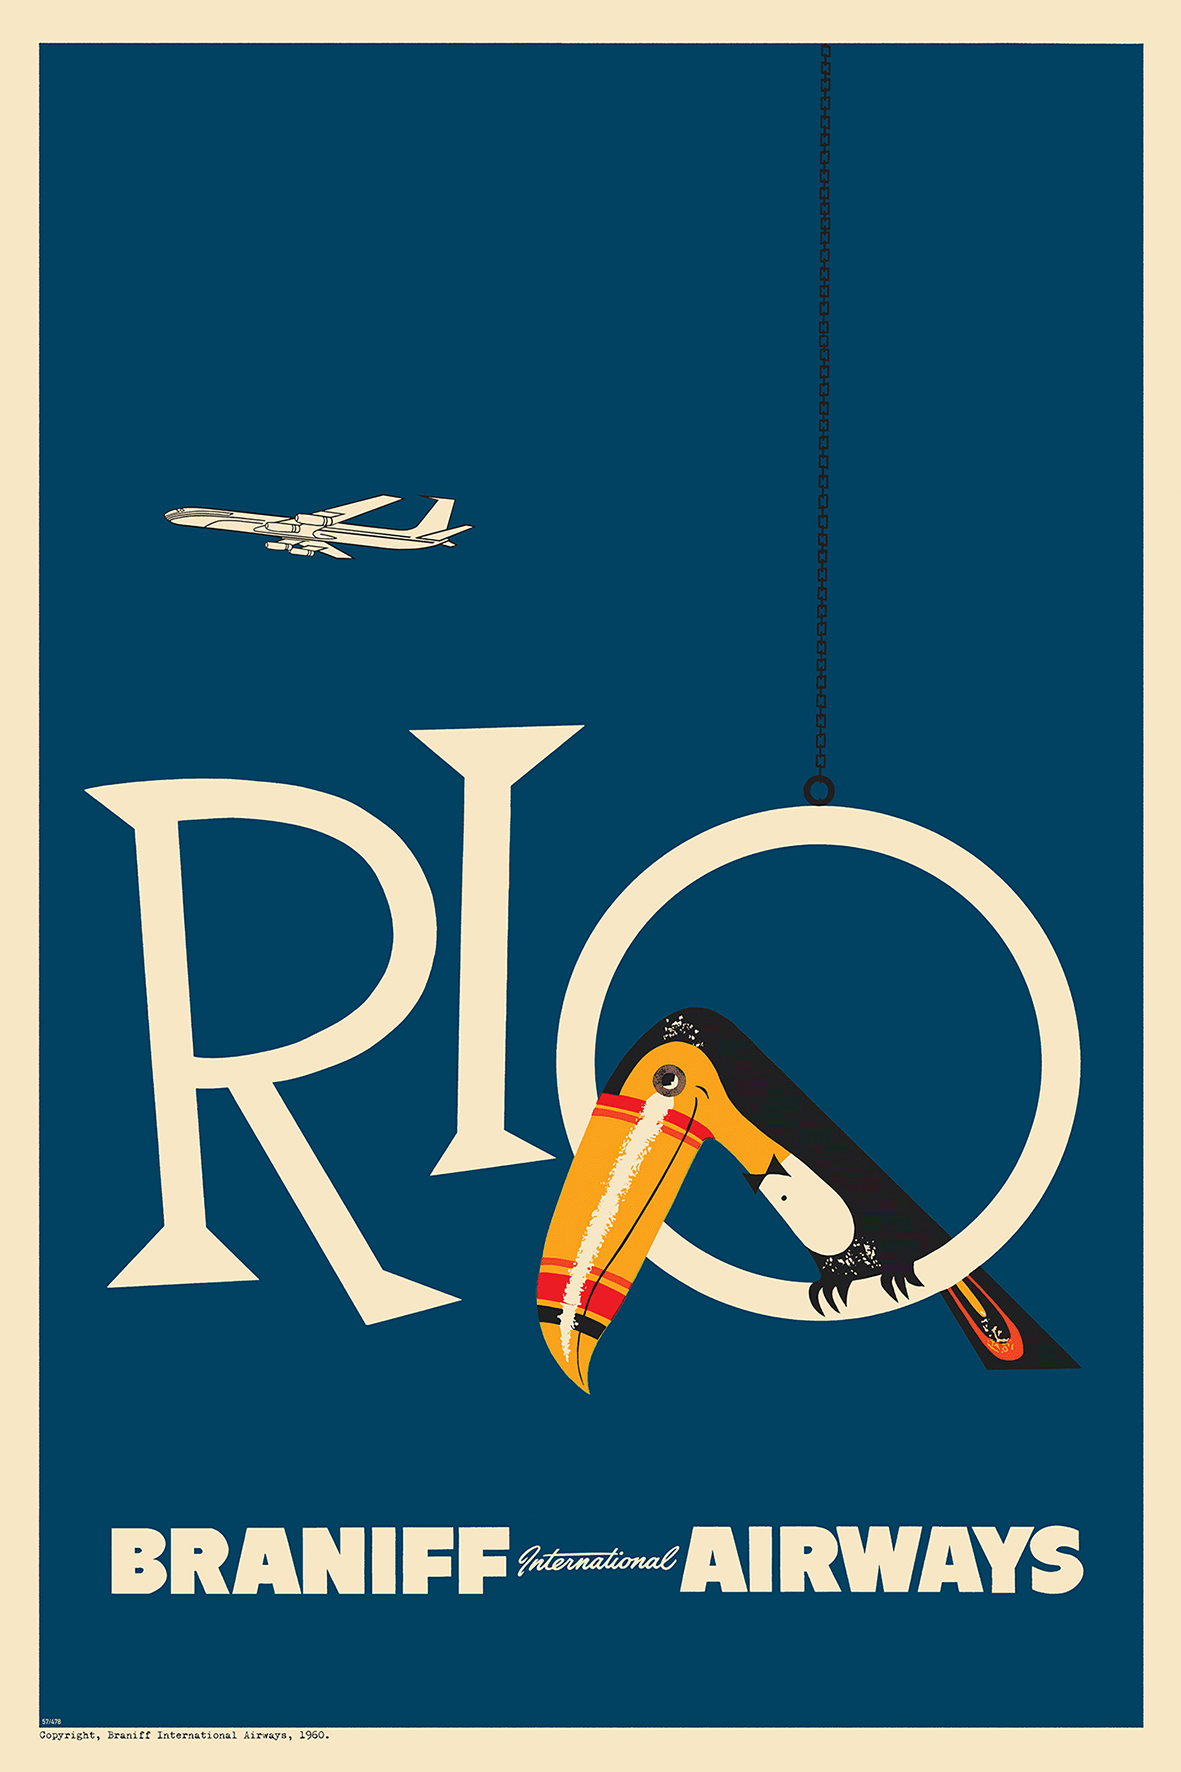 Braniff Rio Toucan Welcome to Brazil, 1959. (Azure blue)